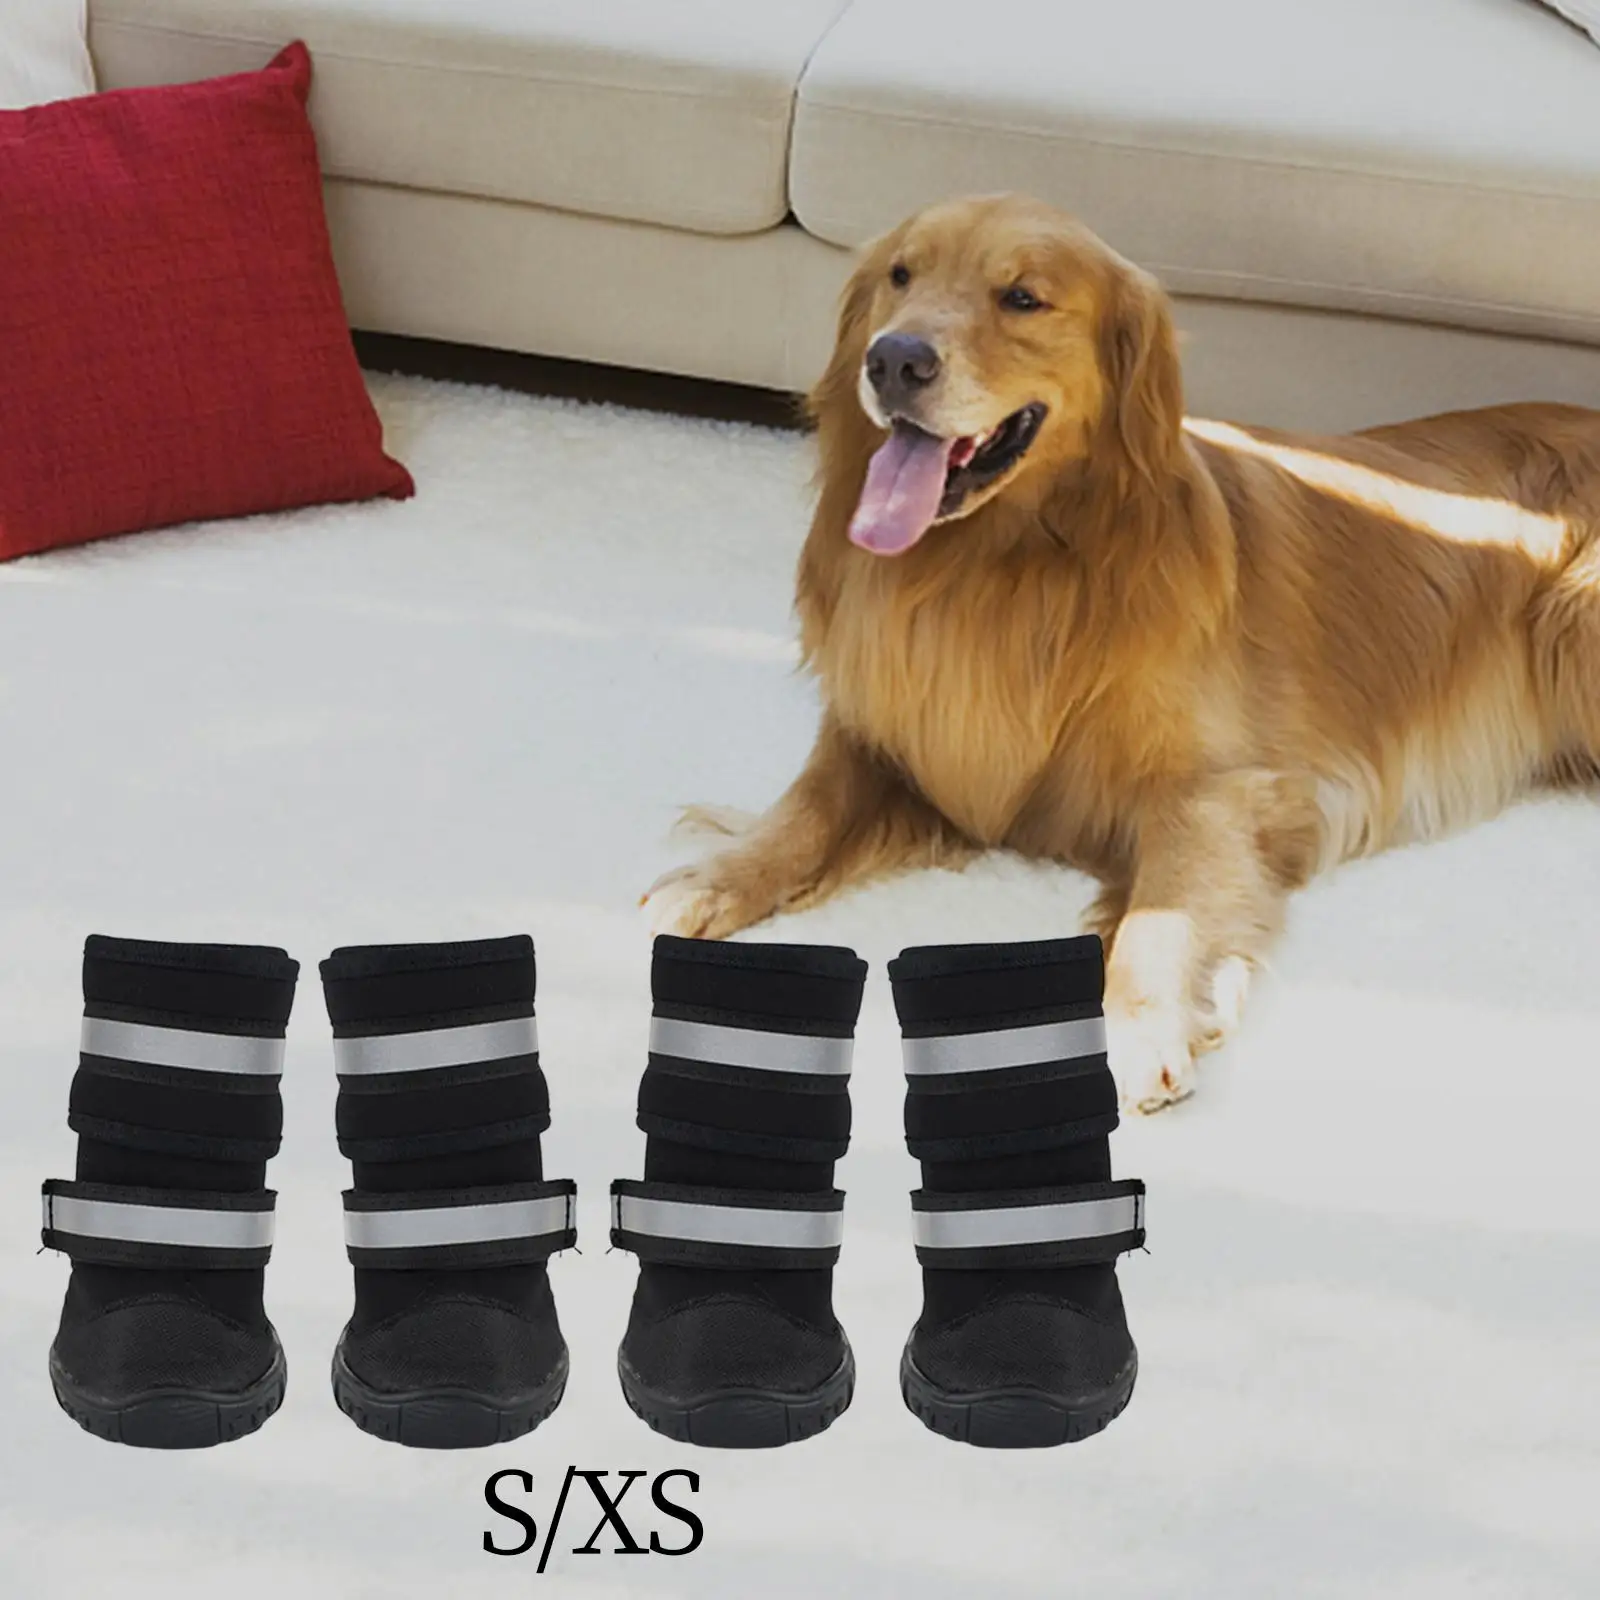 Dog Boots Adjustable Straps Fleece Lining Dog Shoes for Hiking Hot Pavement